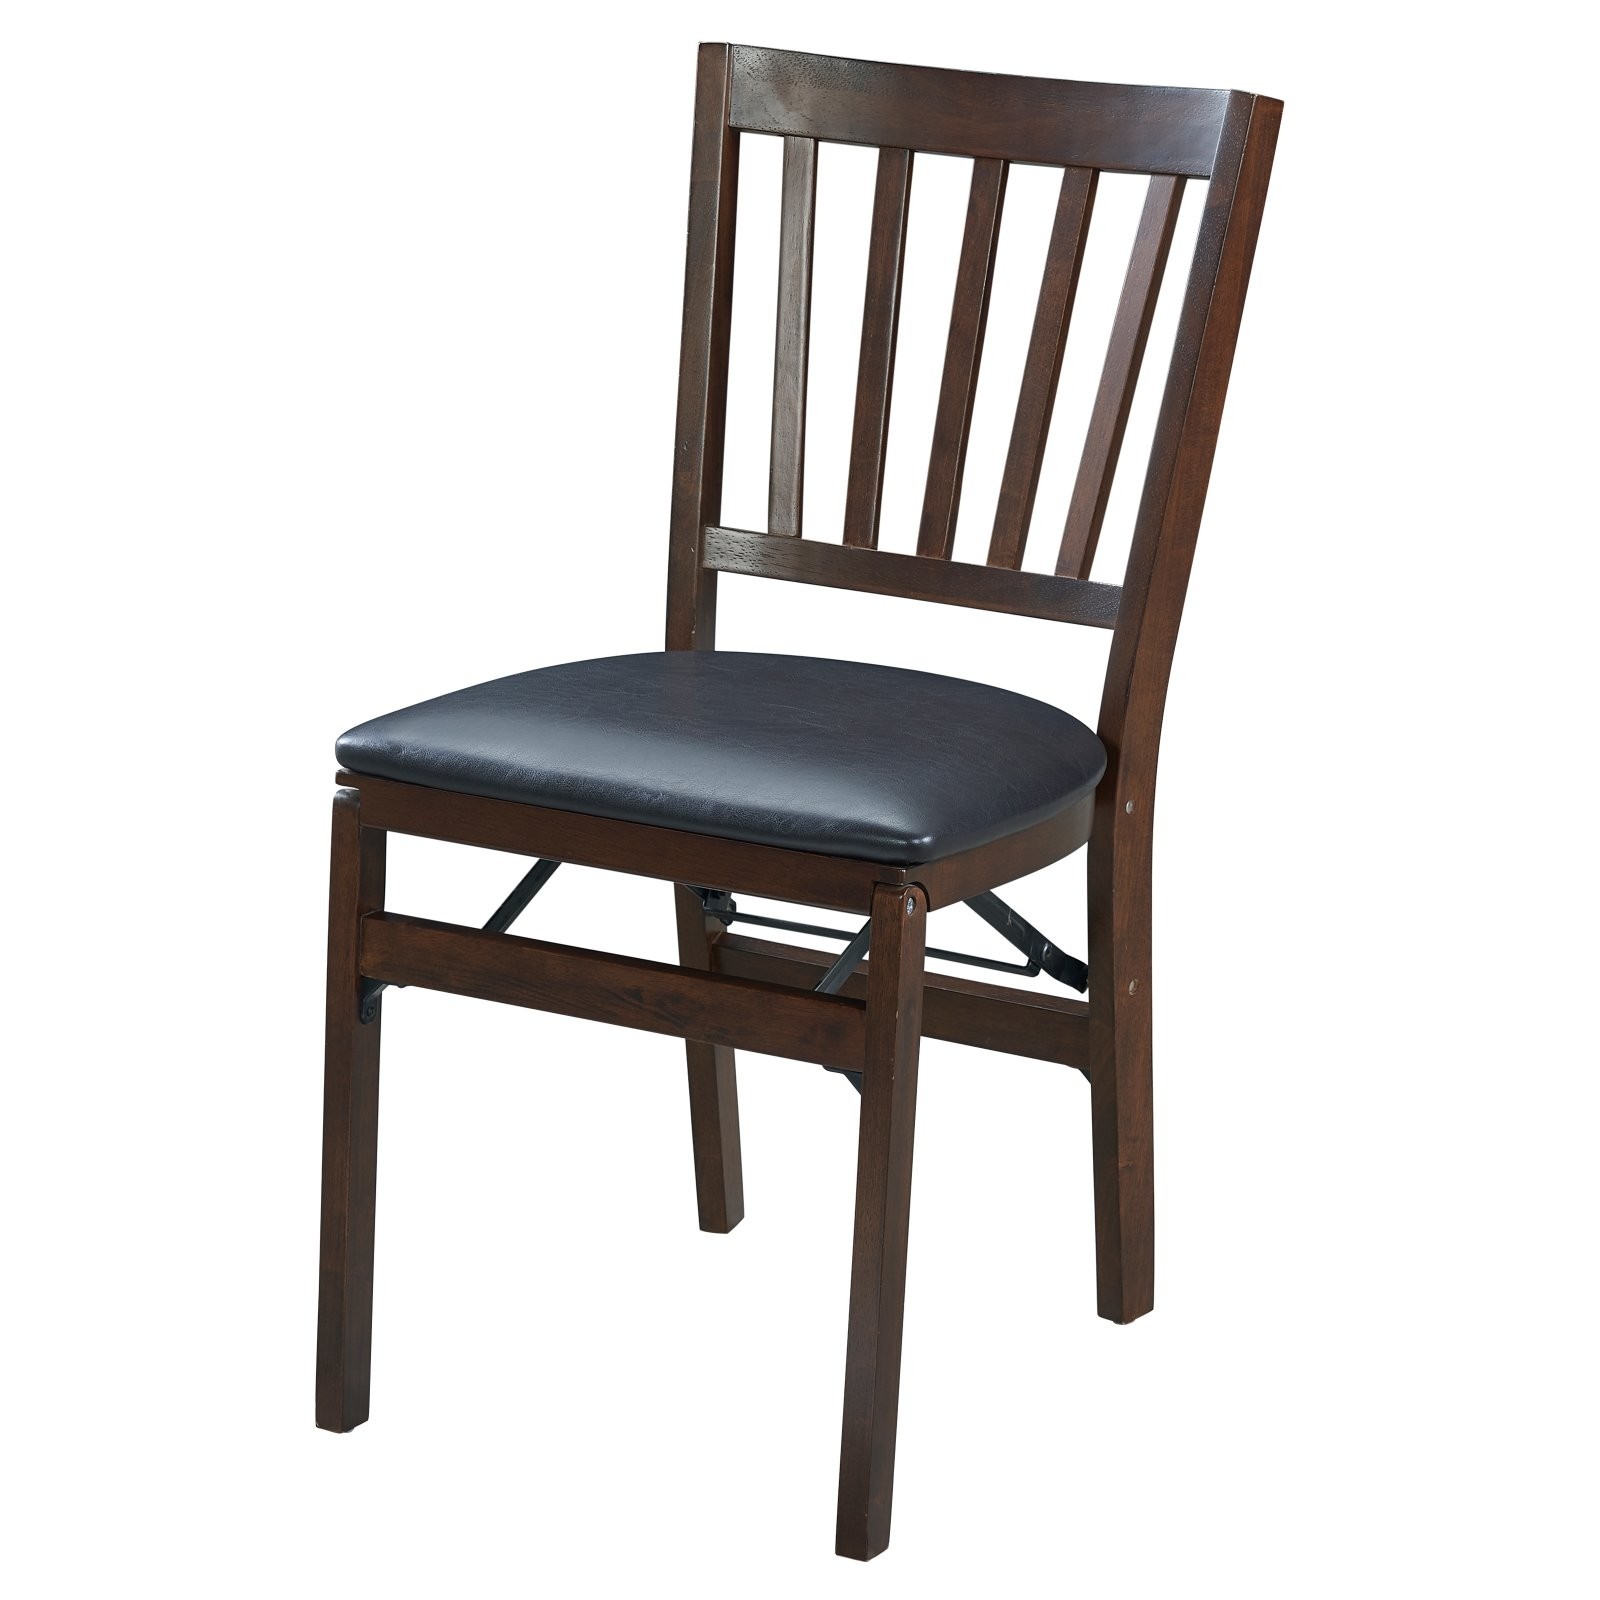 Stakmore school house folding dining side chair set of 2